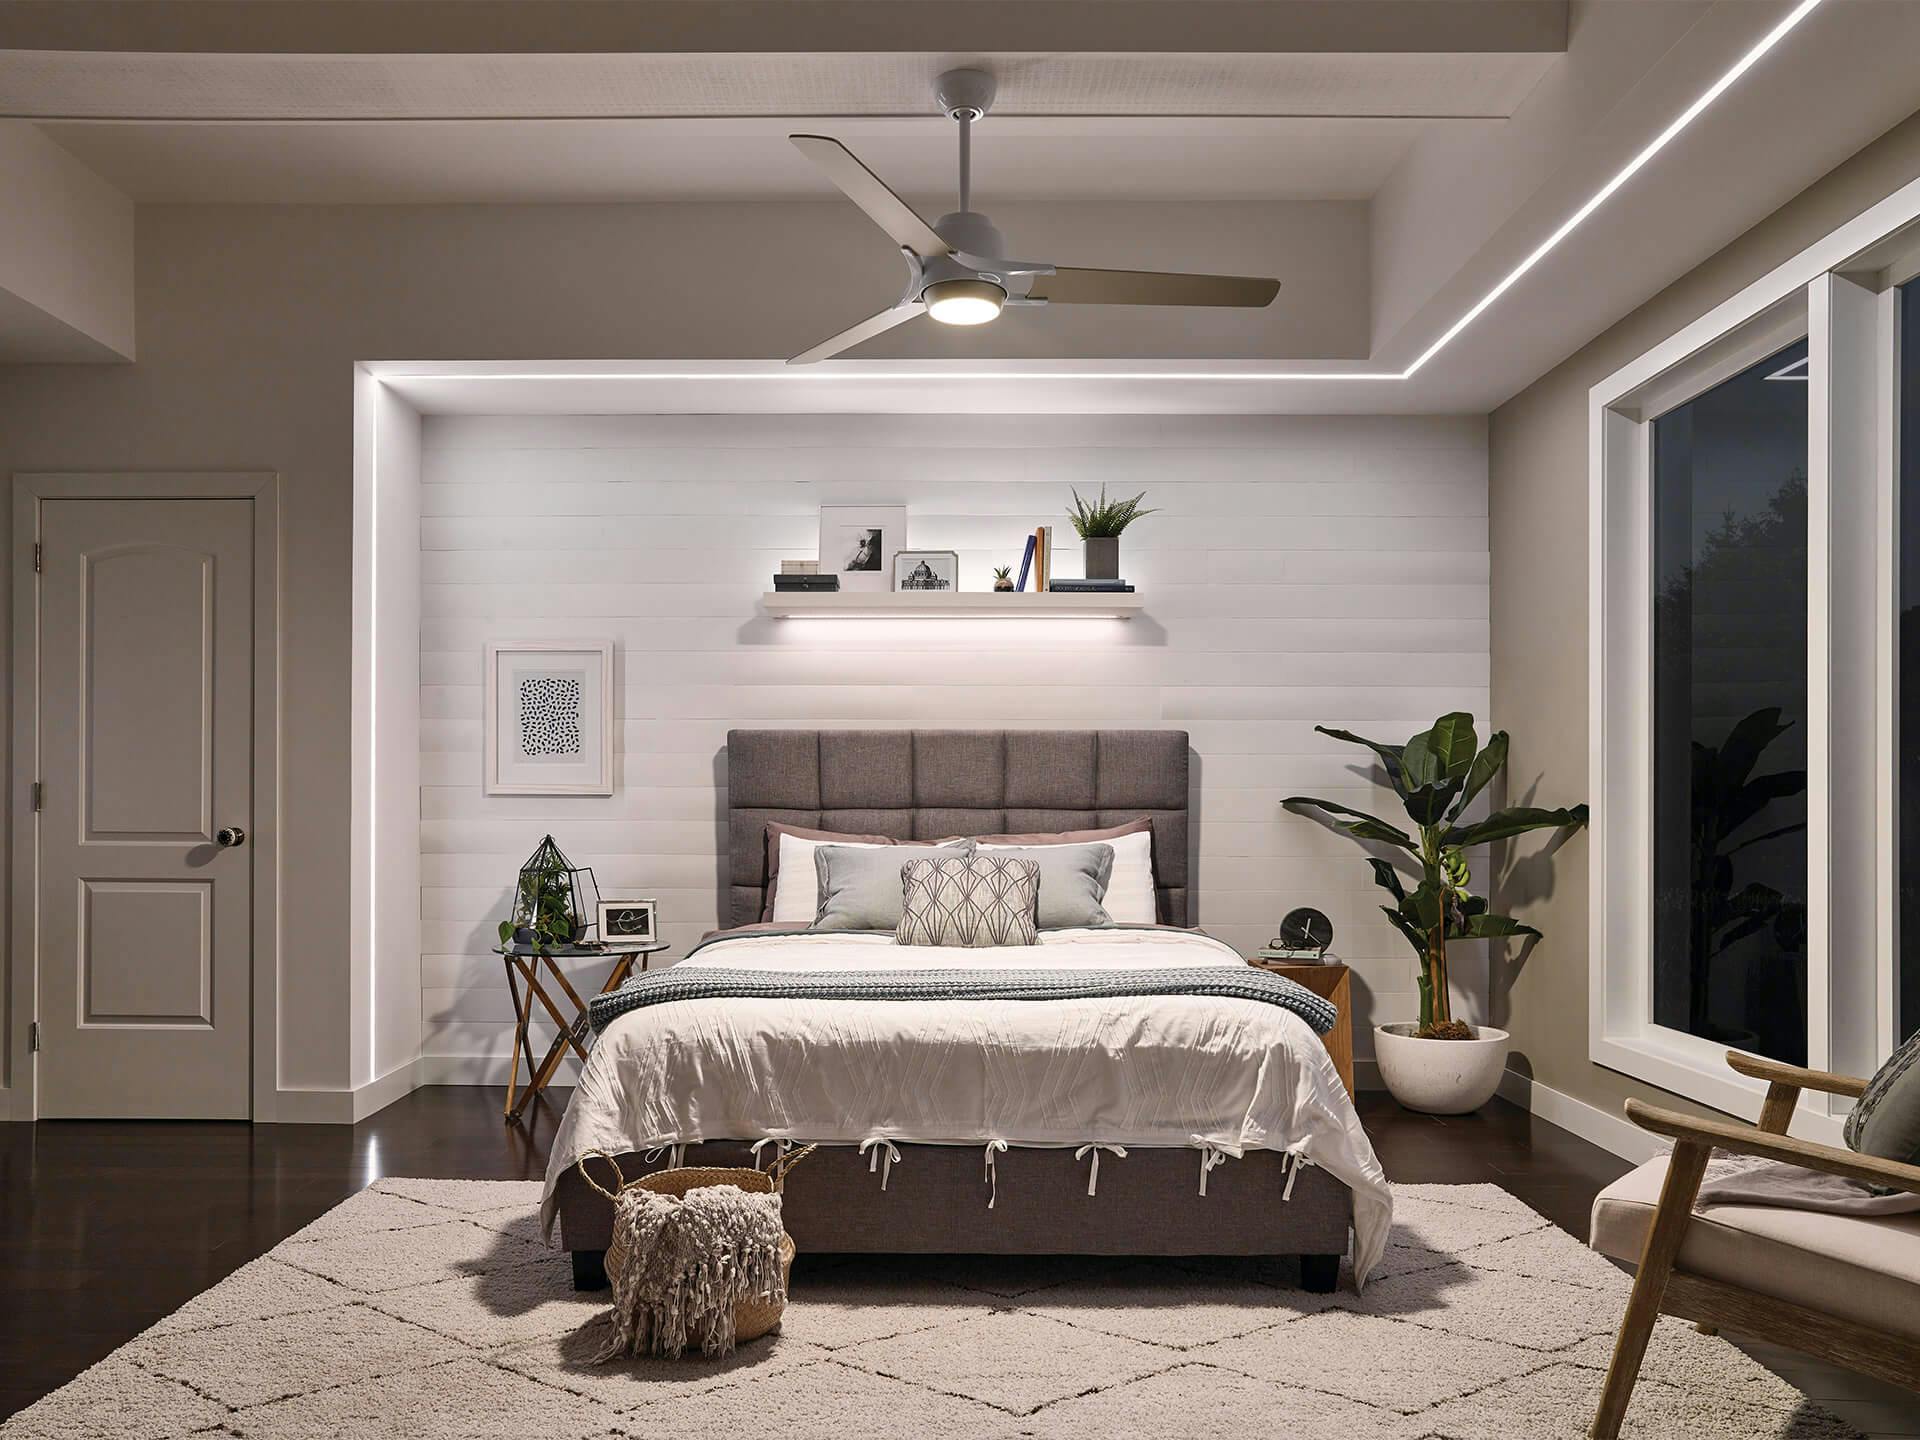 Bedroom at night with a Zeus ceiling fan